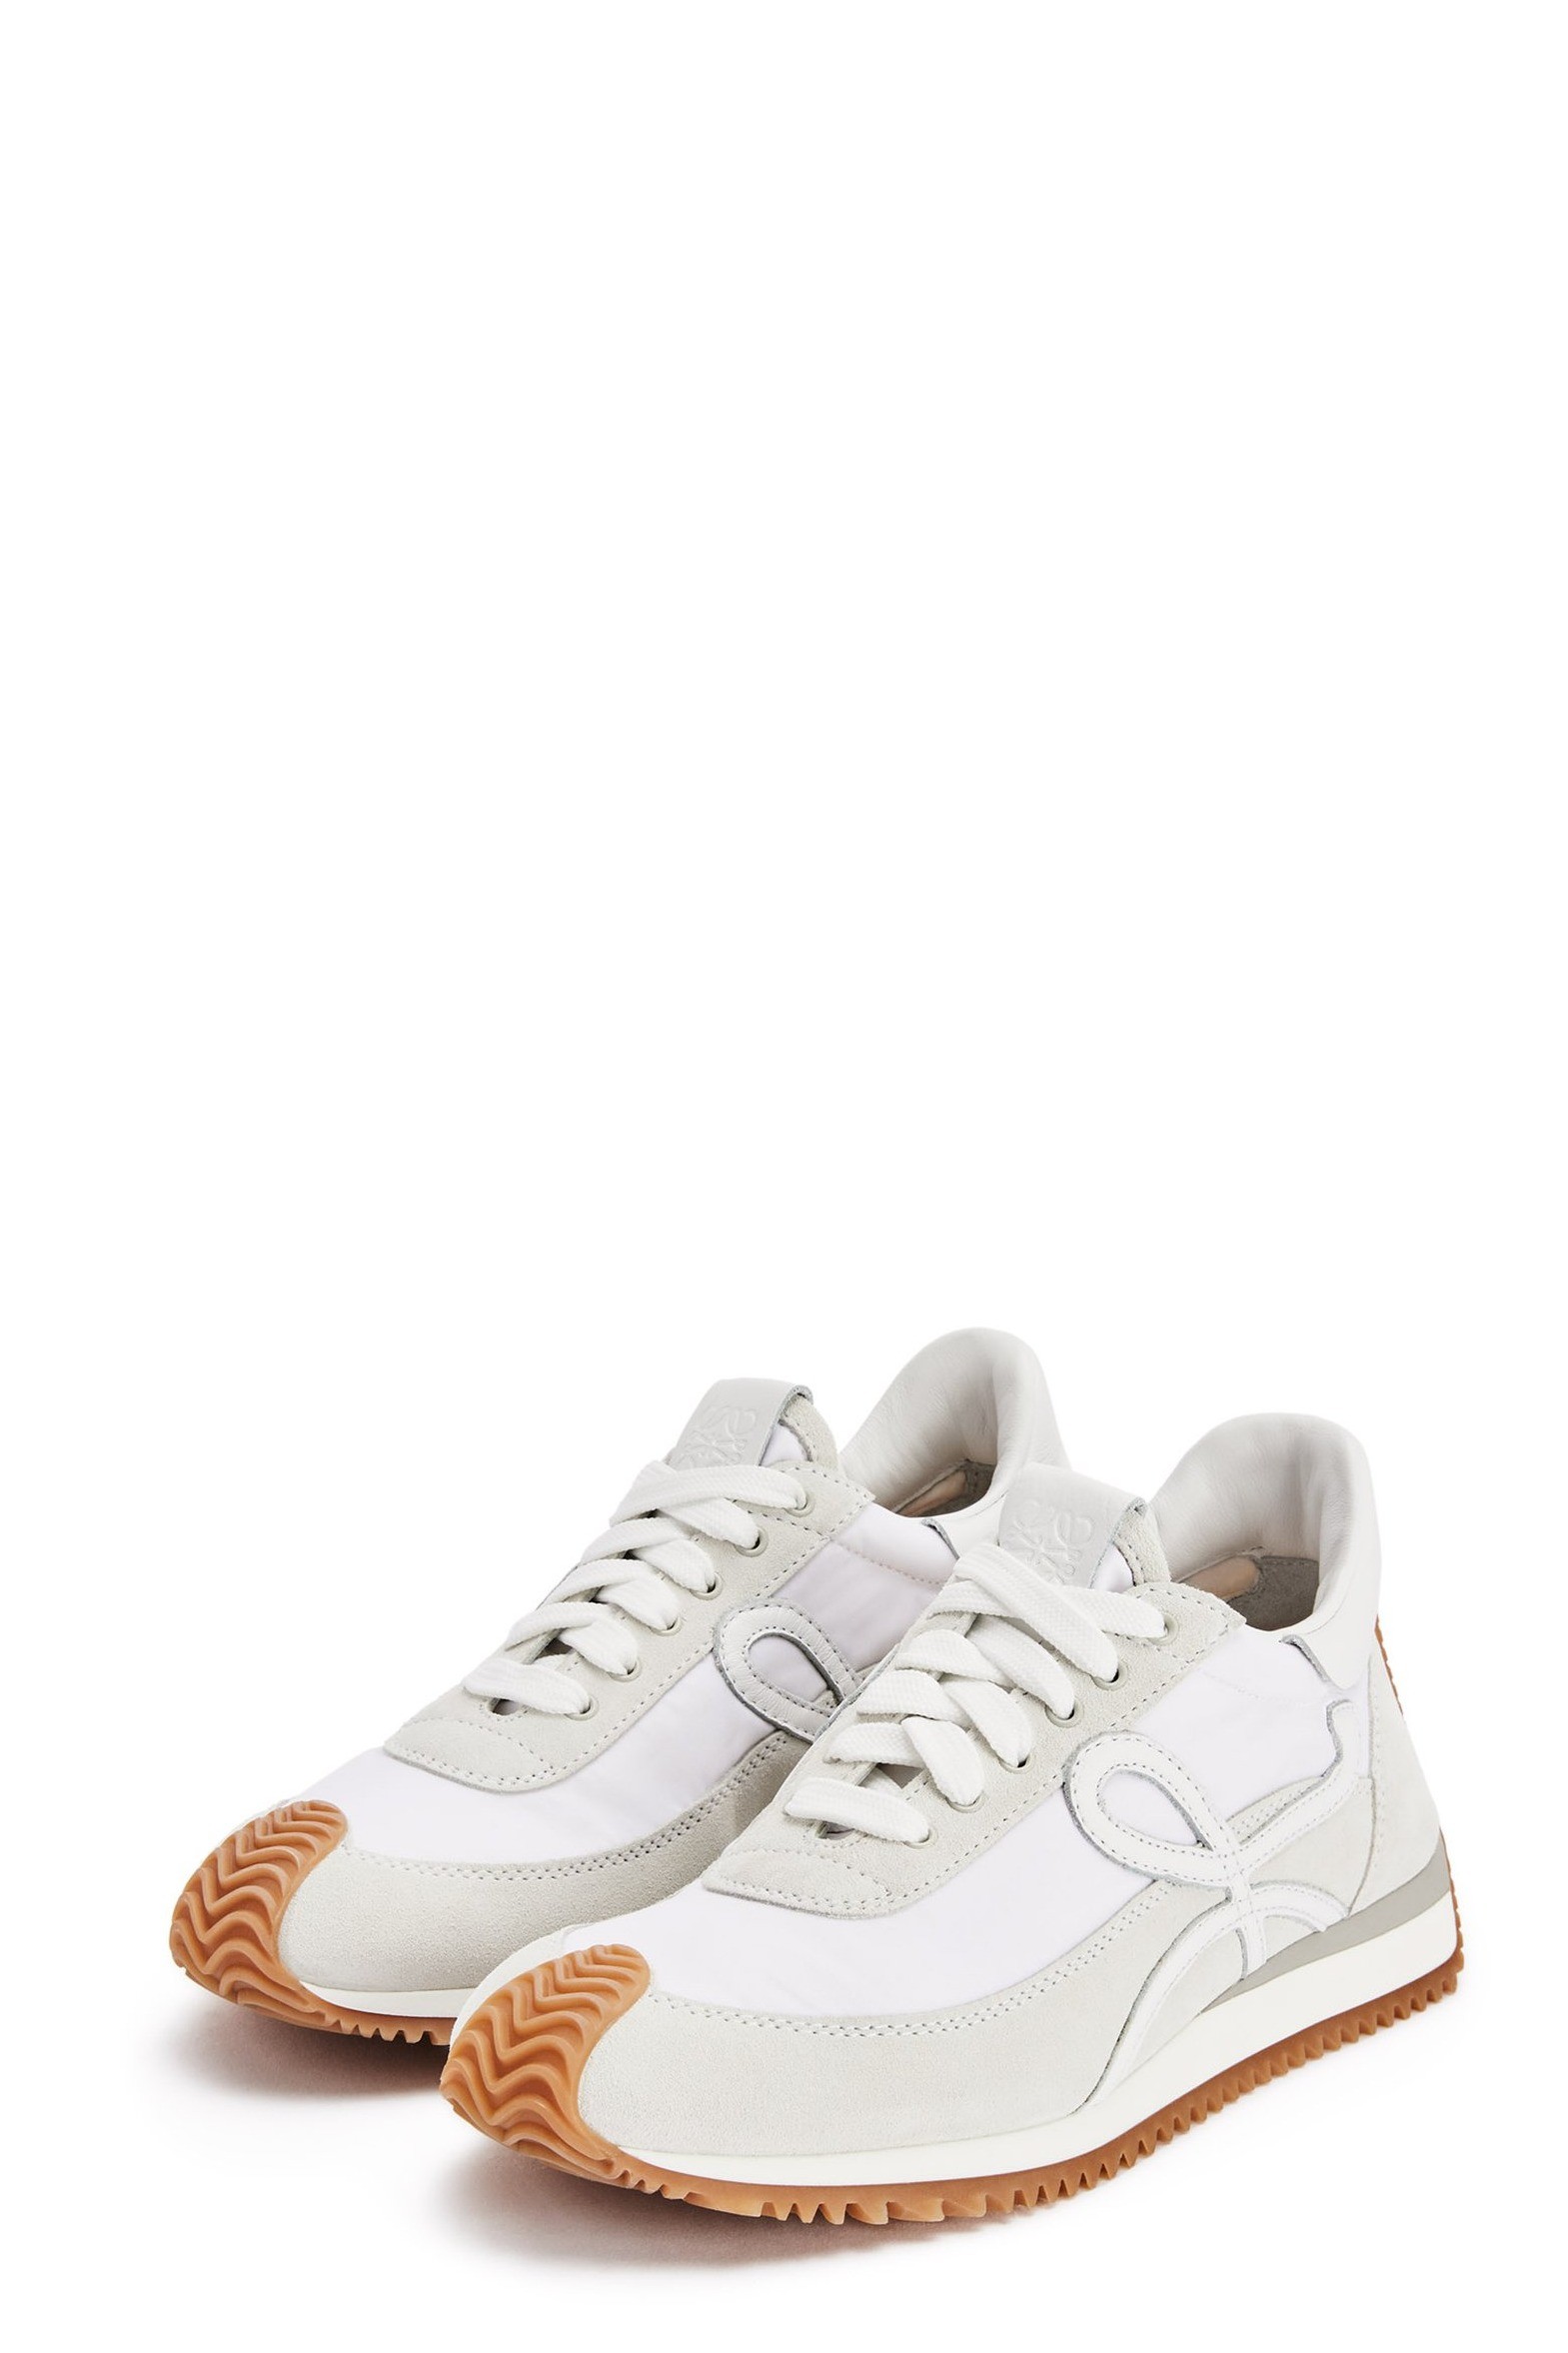 Flow Runner in nylon and suede - White